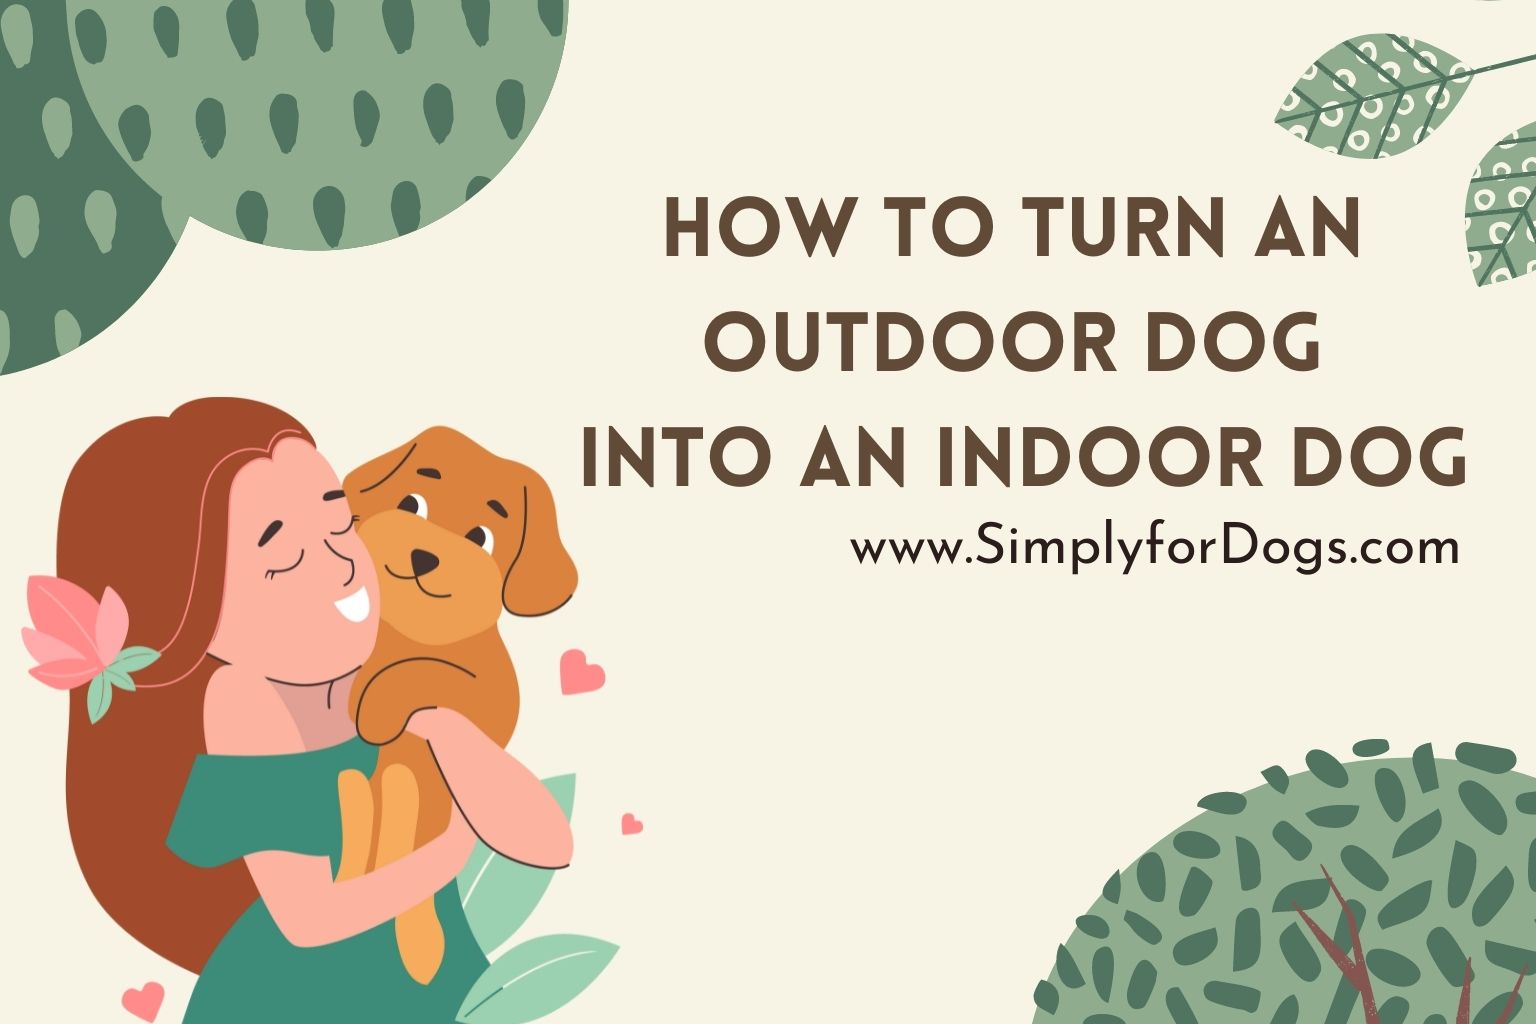 How to Turn an Outdoor Dog into an Indoor Dog